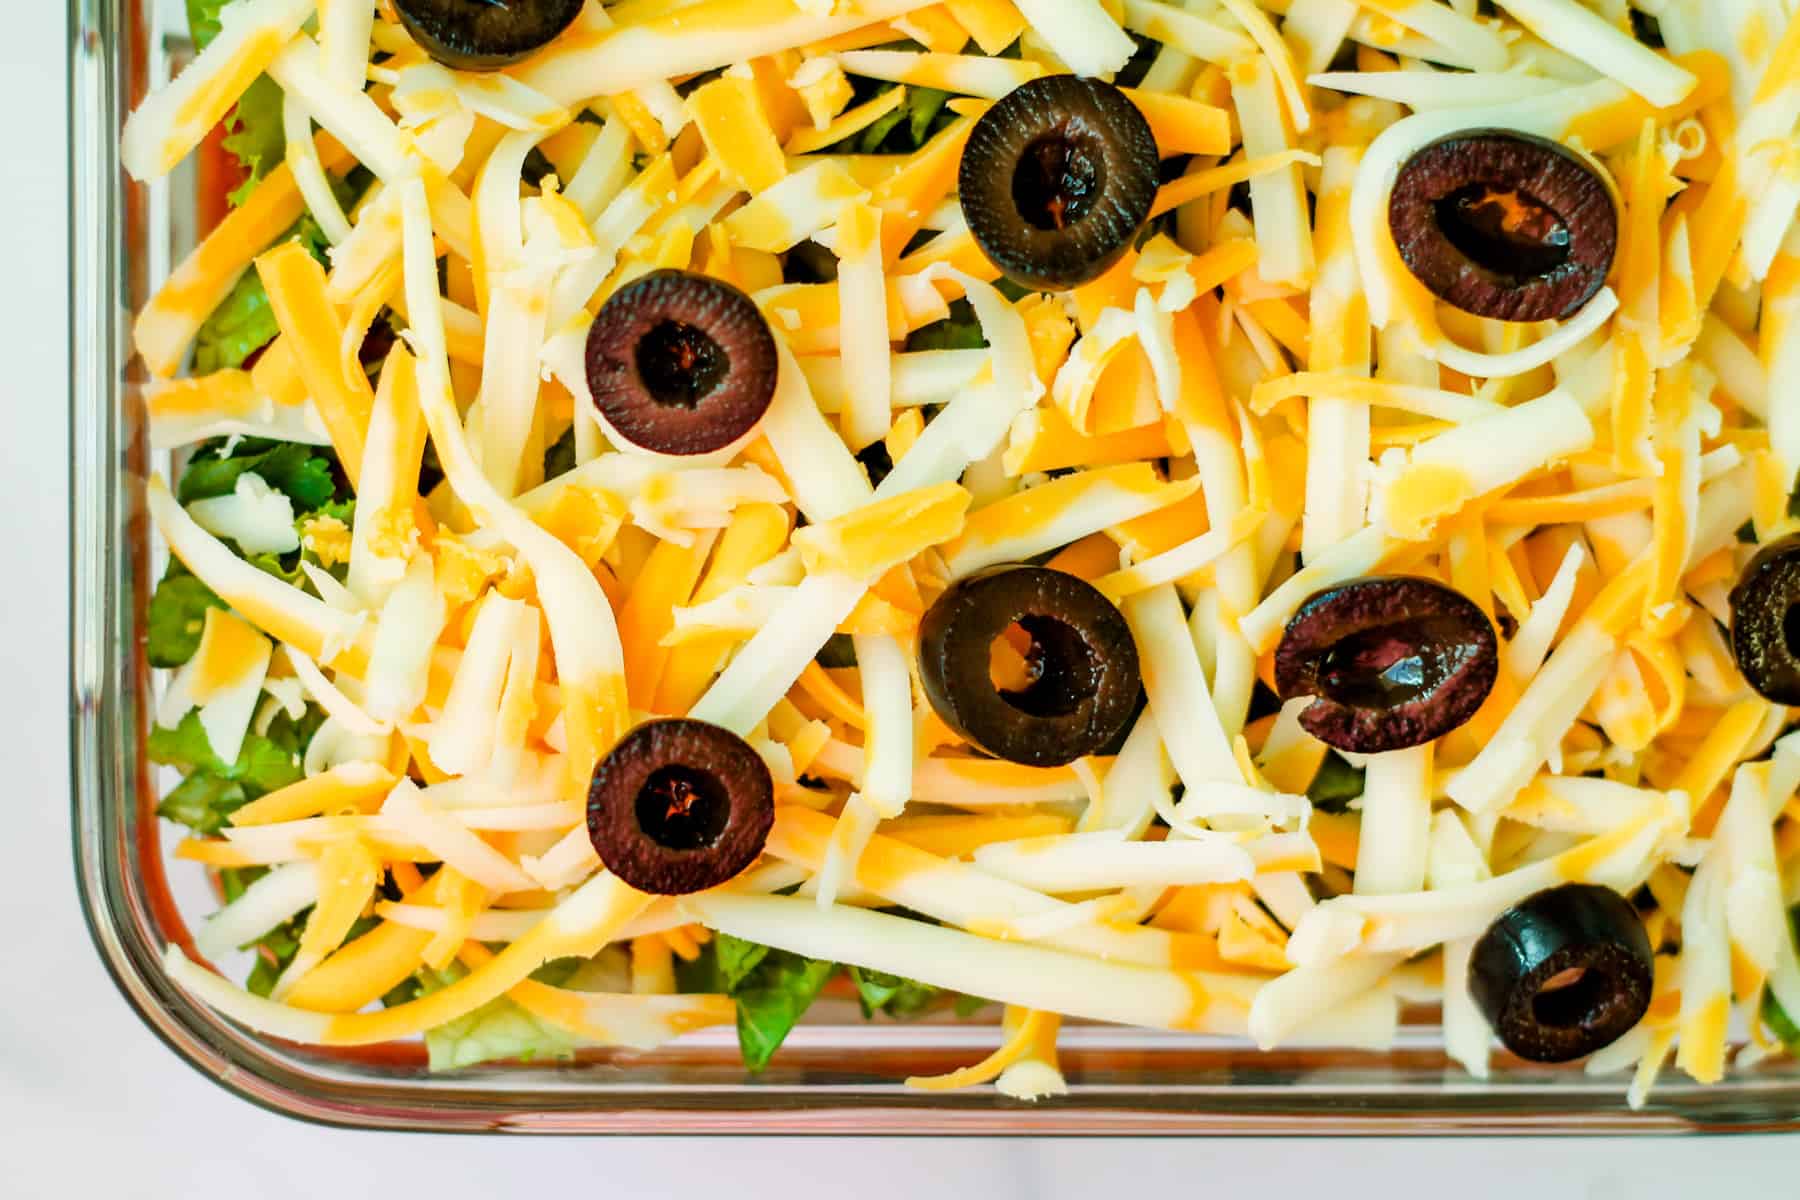 sliced black olives on top of shredded cheese.